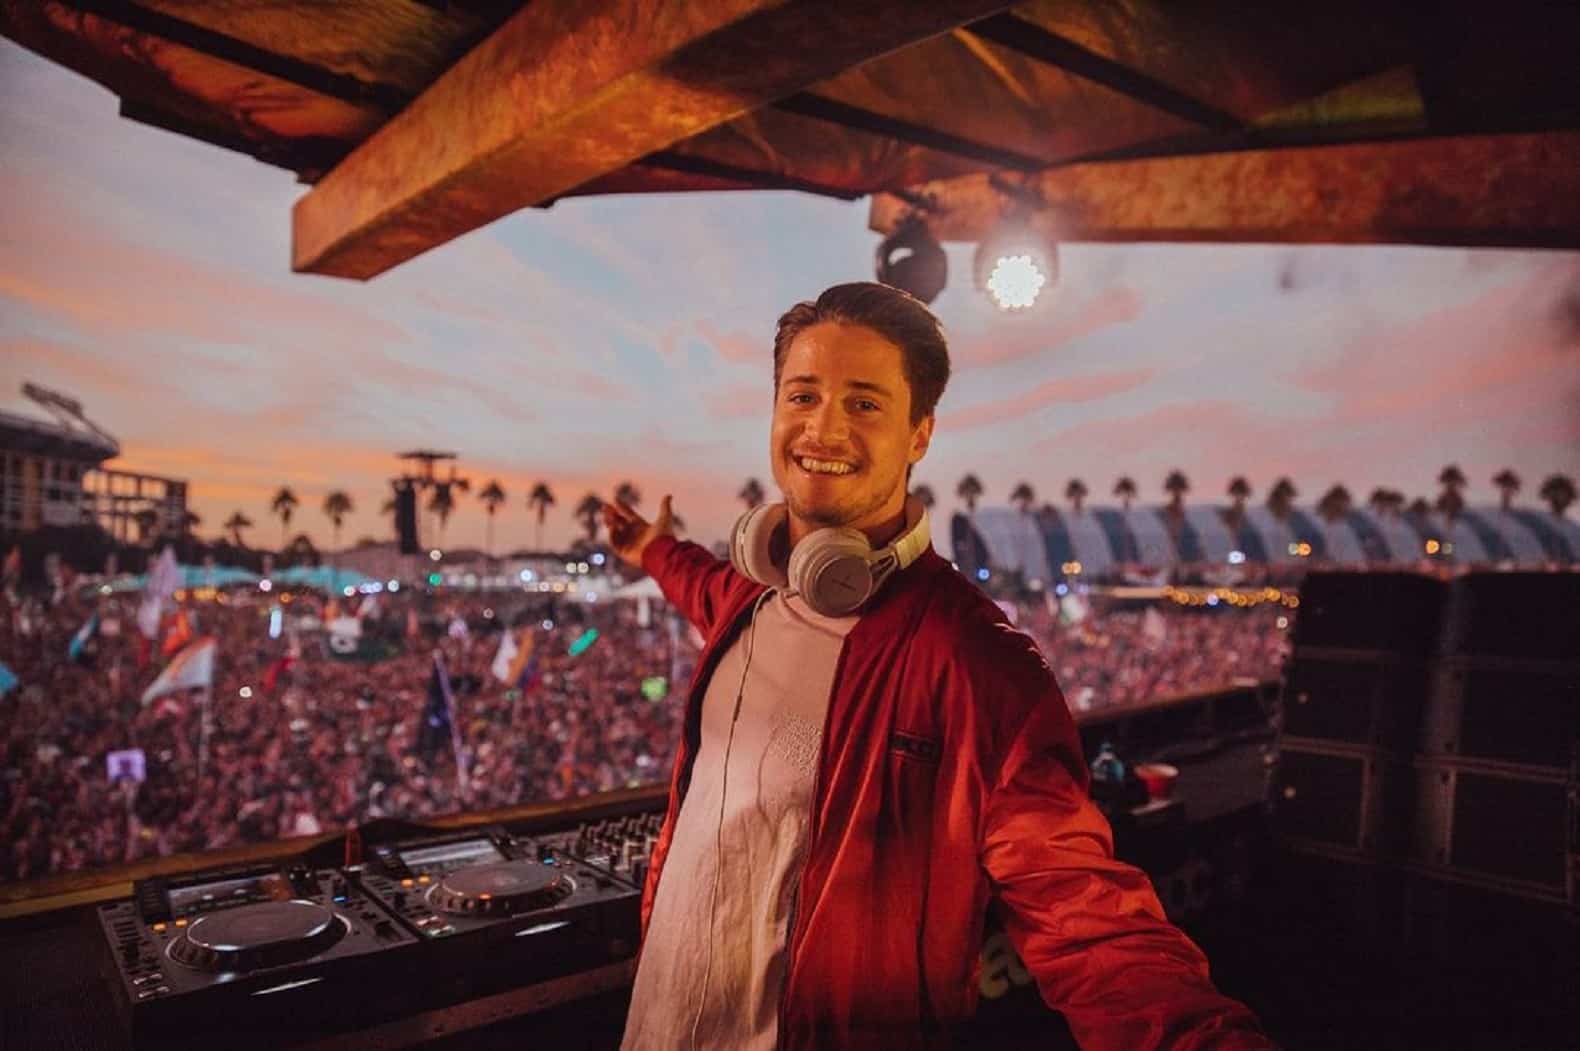 Kygo takes a trip down the sentimental road with latest single ‘Freeze’: Listen